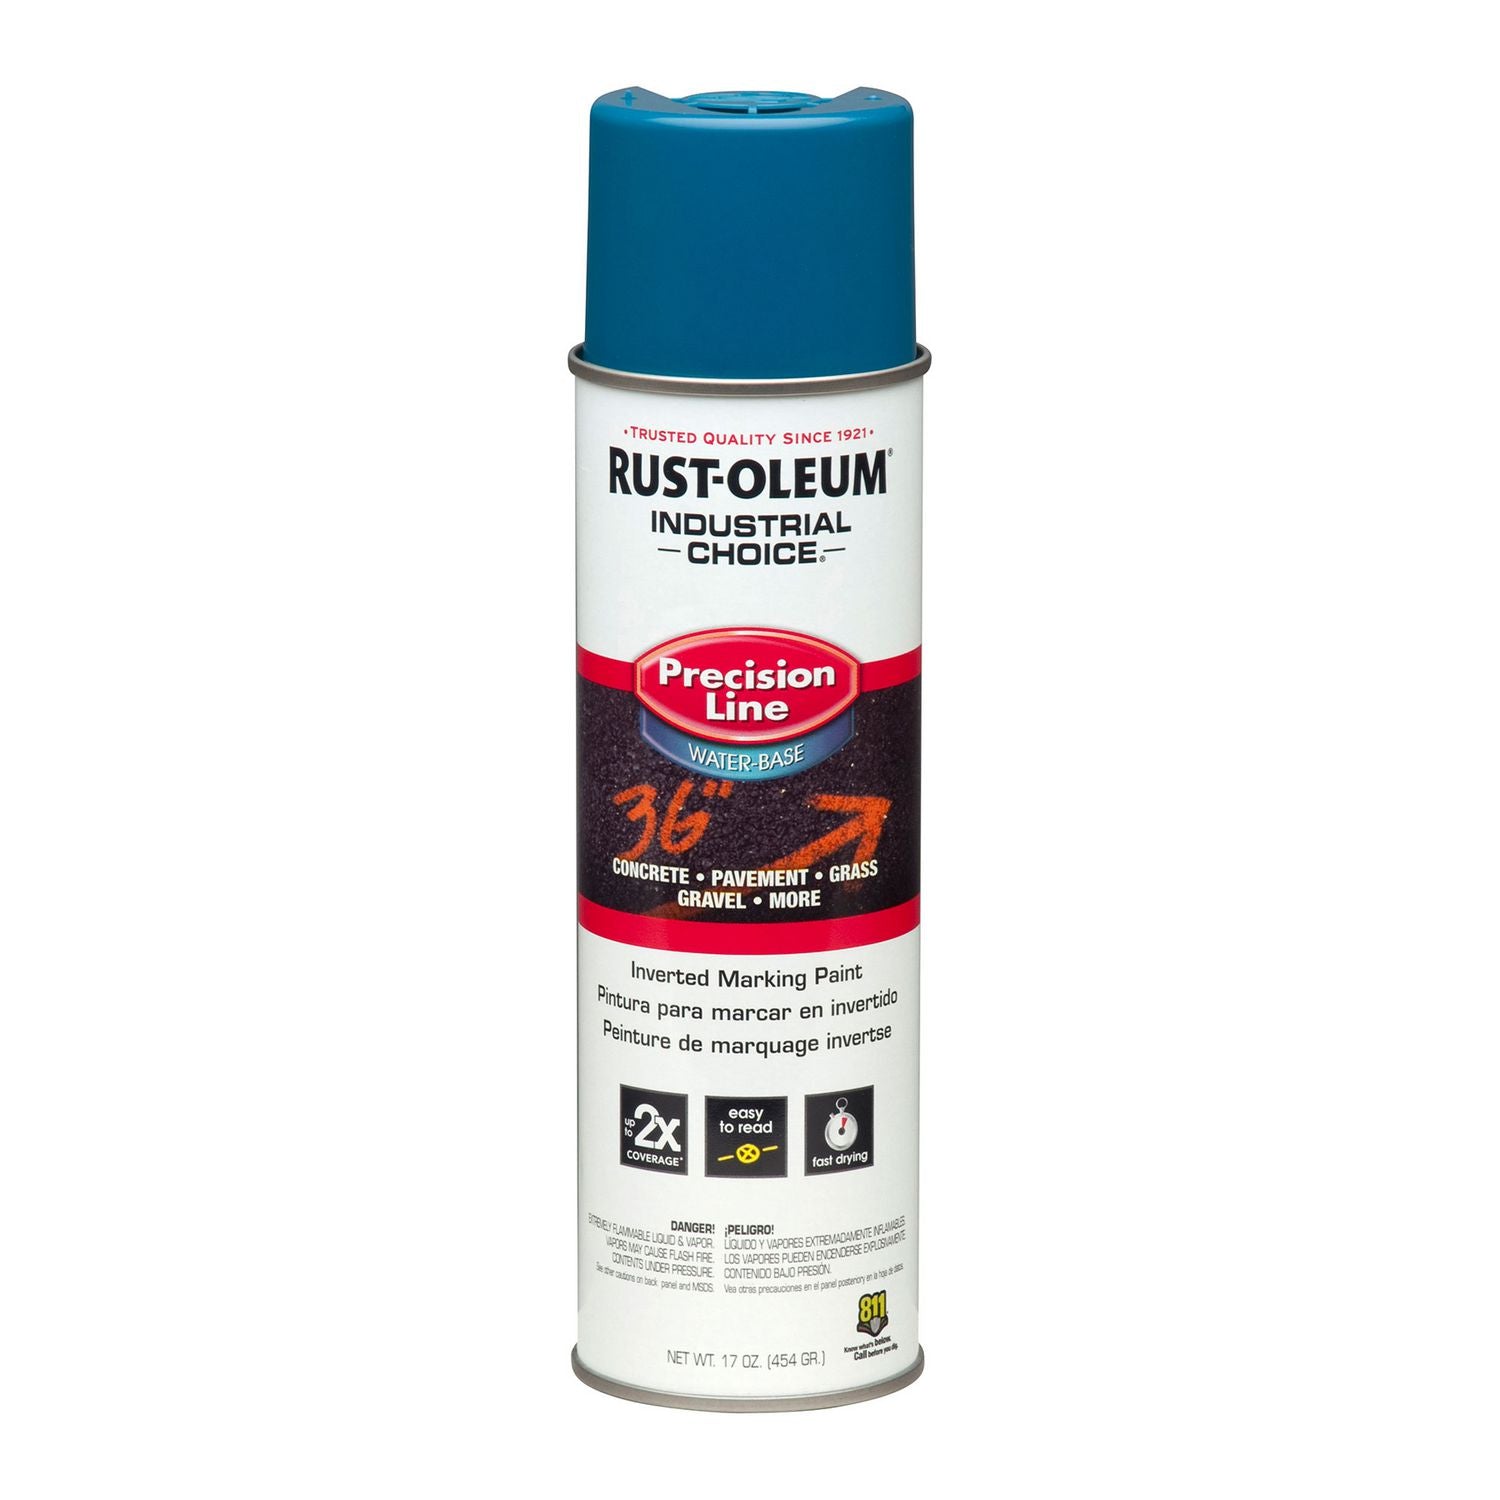 industrial-choice-m1800-system-water-based-precision-line-marking-paint-flat-apwa-caution-blue-17-oz-aerosol-can-12-carton_rst203031ct - 1